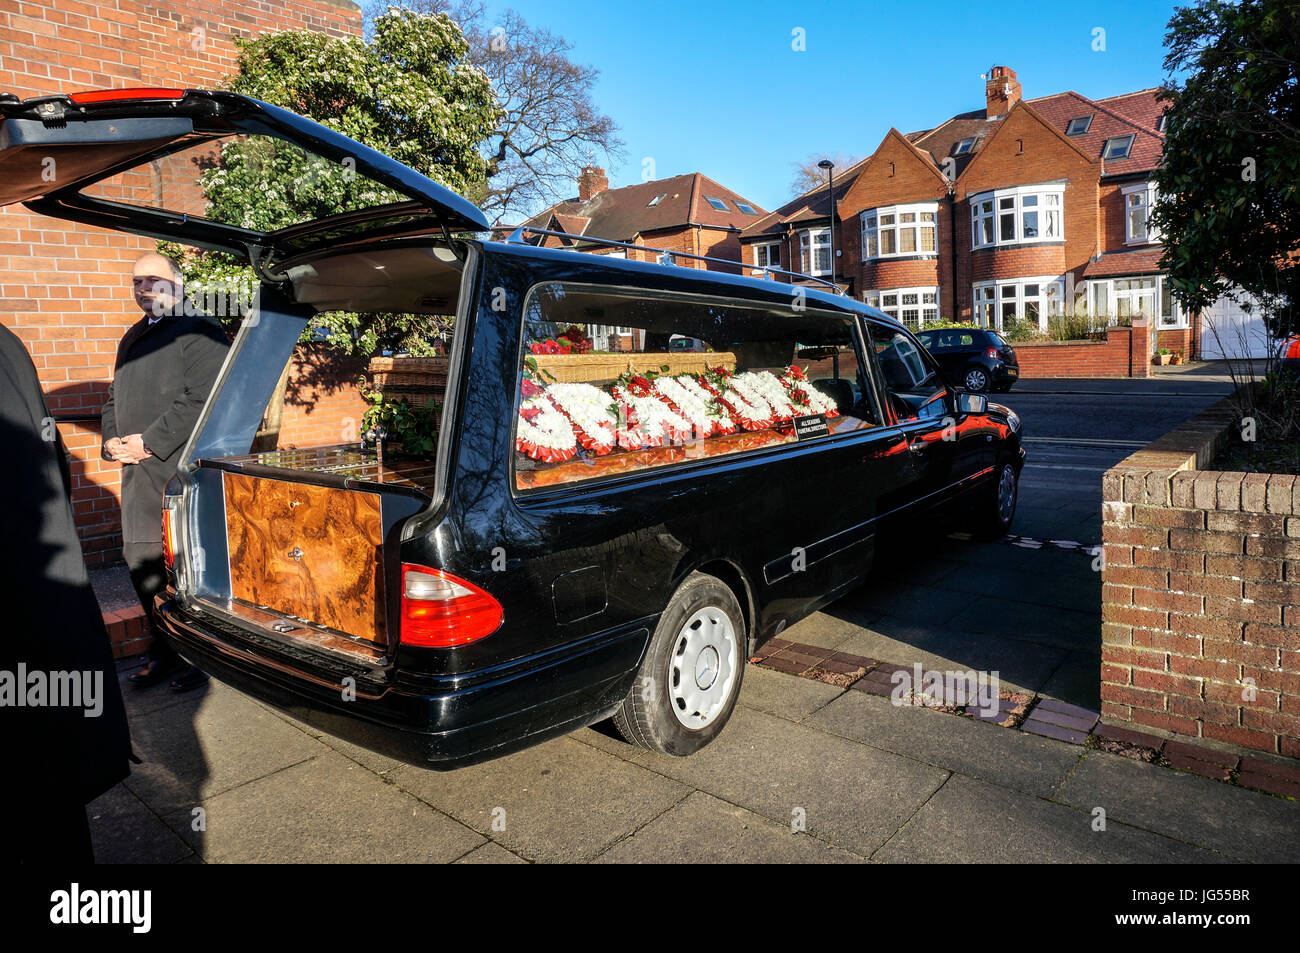 Long shot of a wicker coffin and floral tributes on display in a hearse, with the rear tailgate open. Jesmond, Newcastle, Tyne and Wear, England, UK. Stock Photo